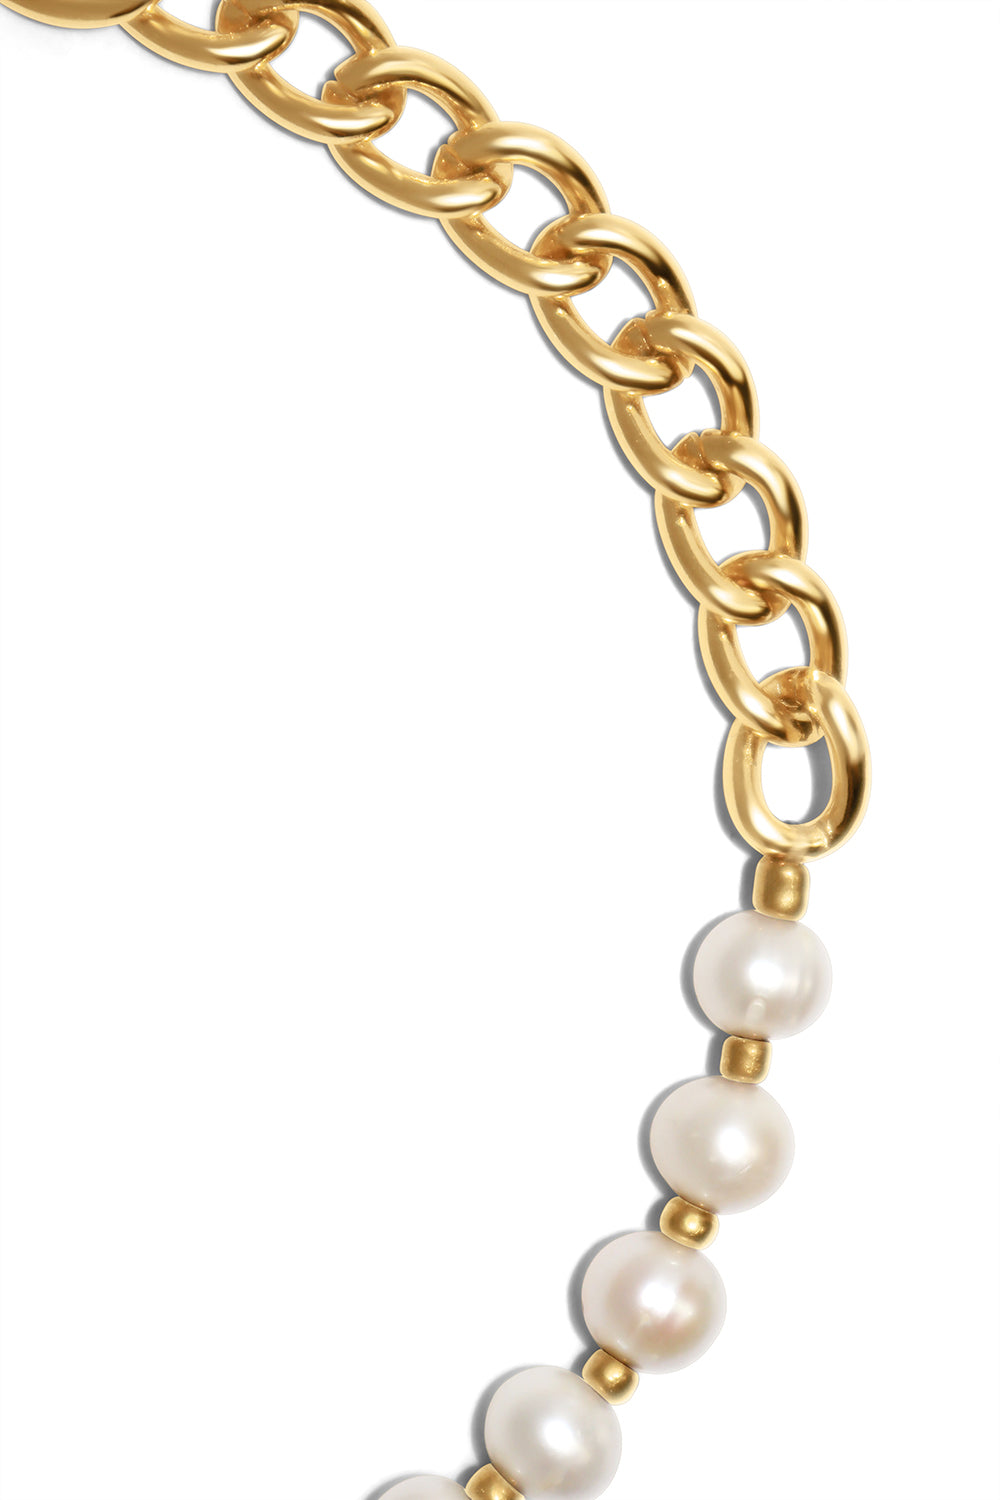 IK Plated Gold Chain & Pearls close view